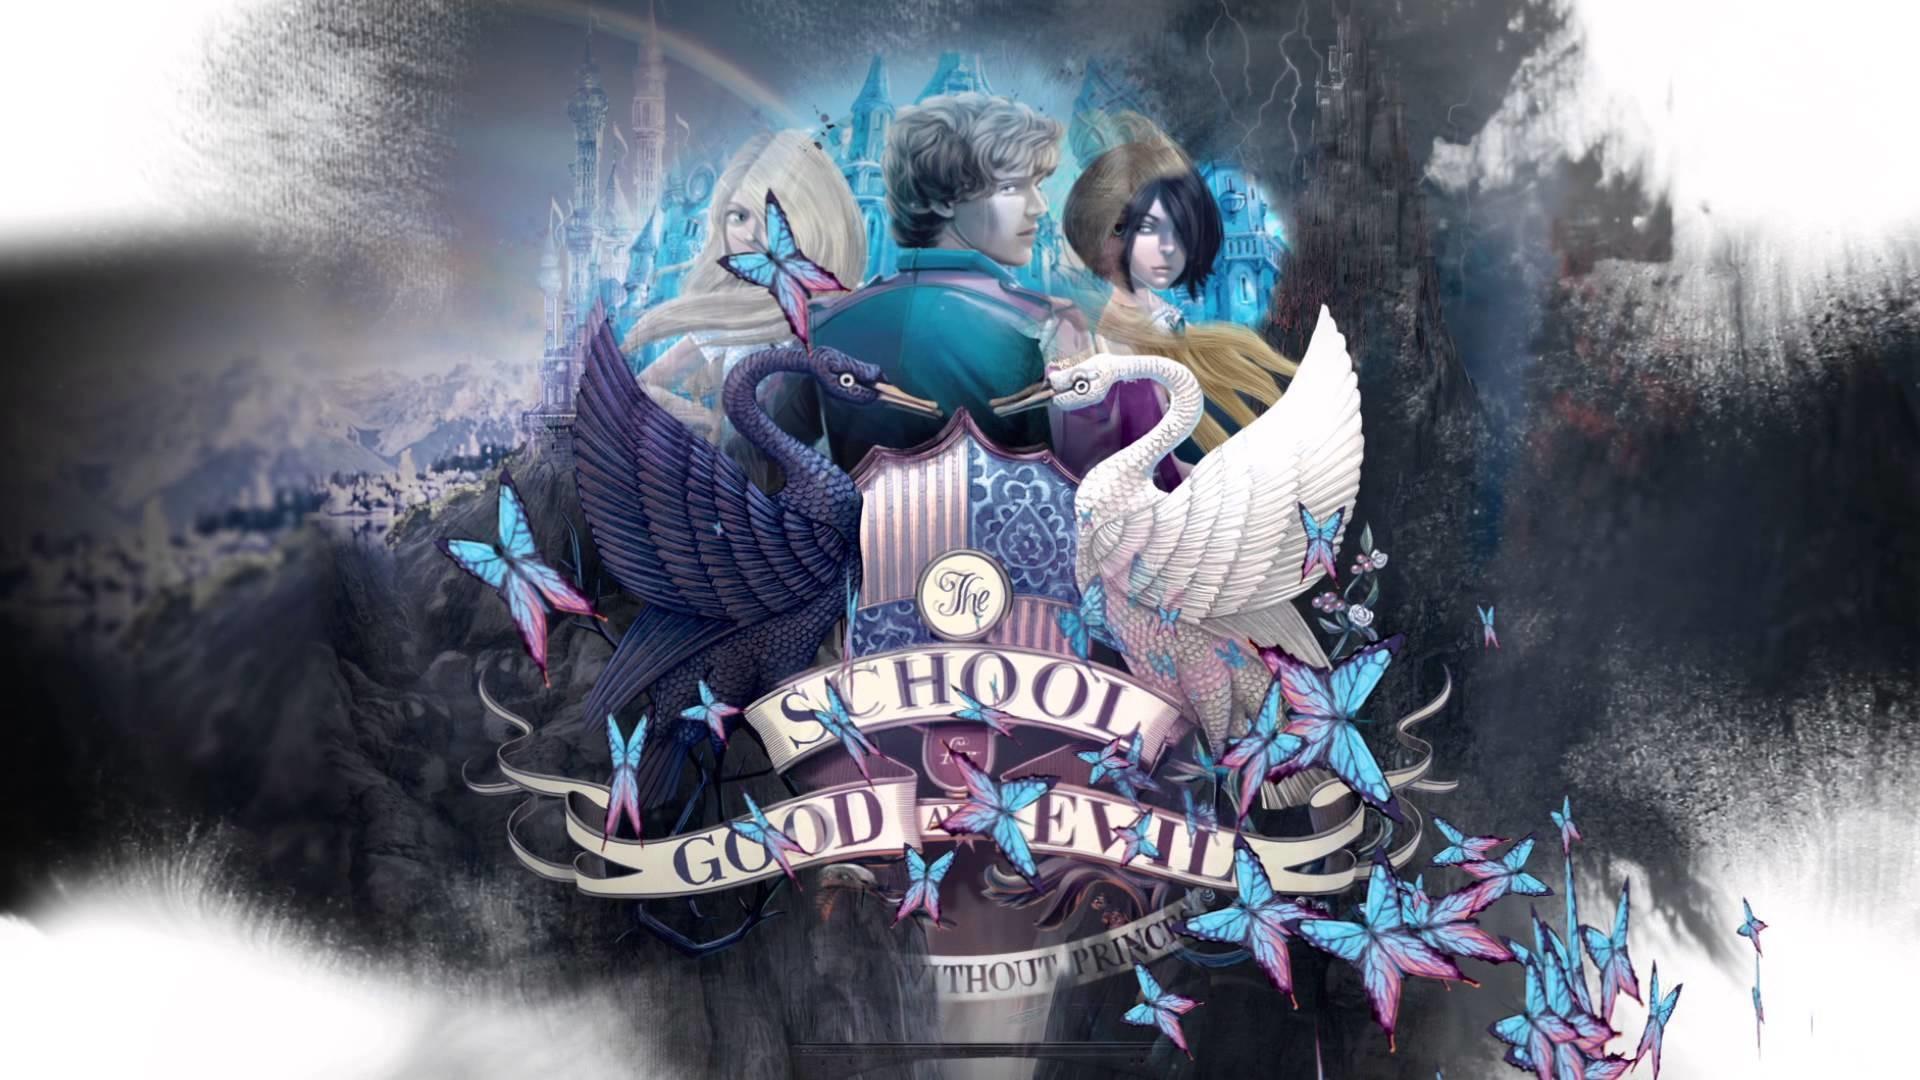 School of Good and Evil - A journey through the worlds of good and evil - School